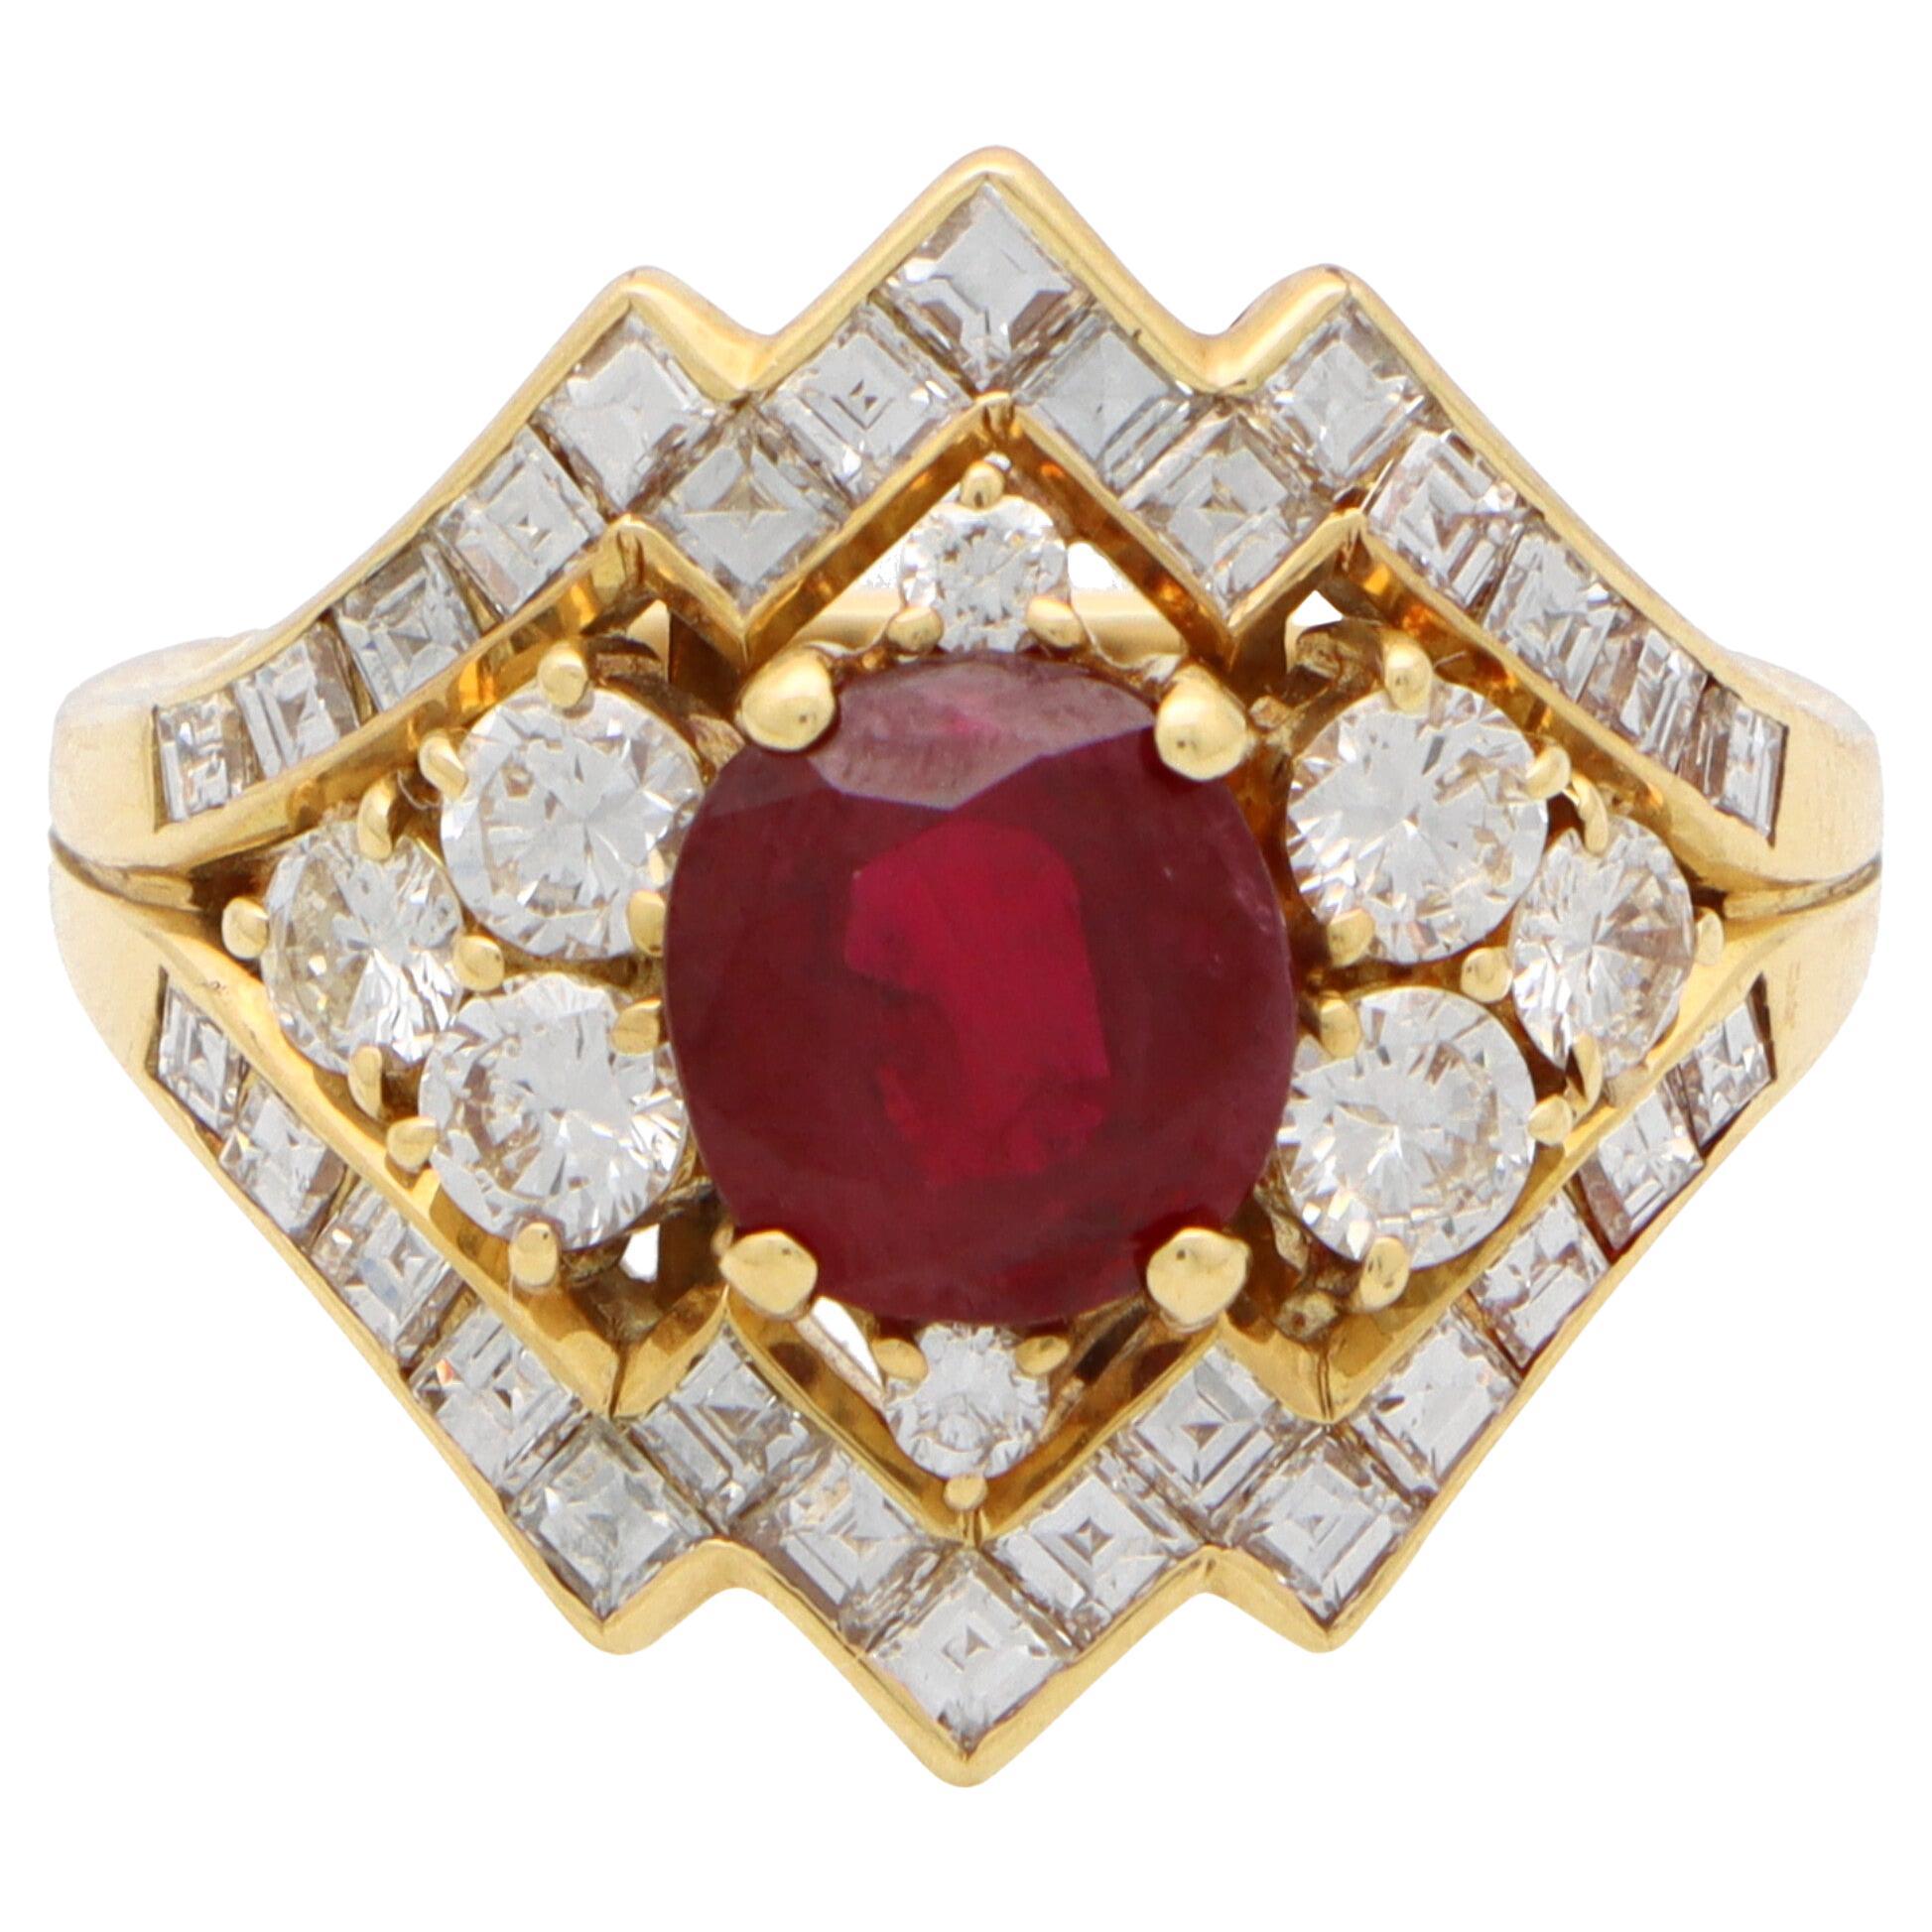 Vintage Piaget Ruby and Diamond Cluster Ring Set in 18k Yellow Gold